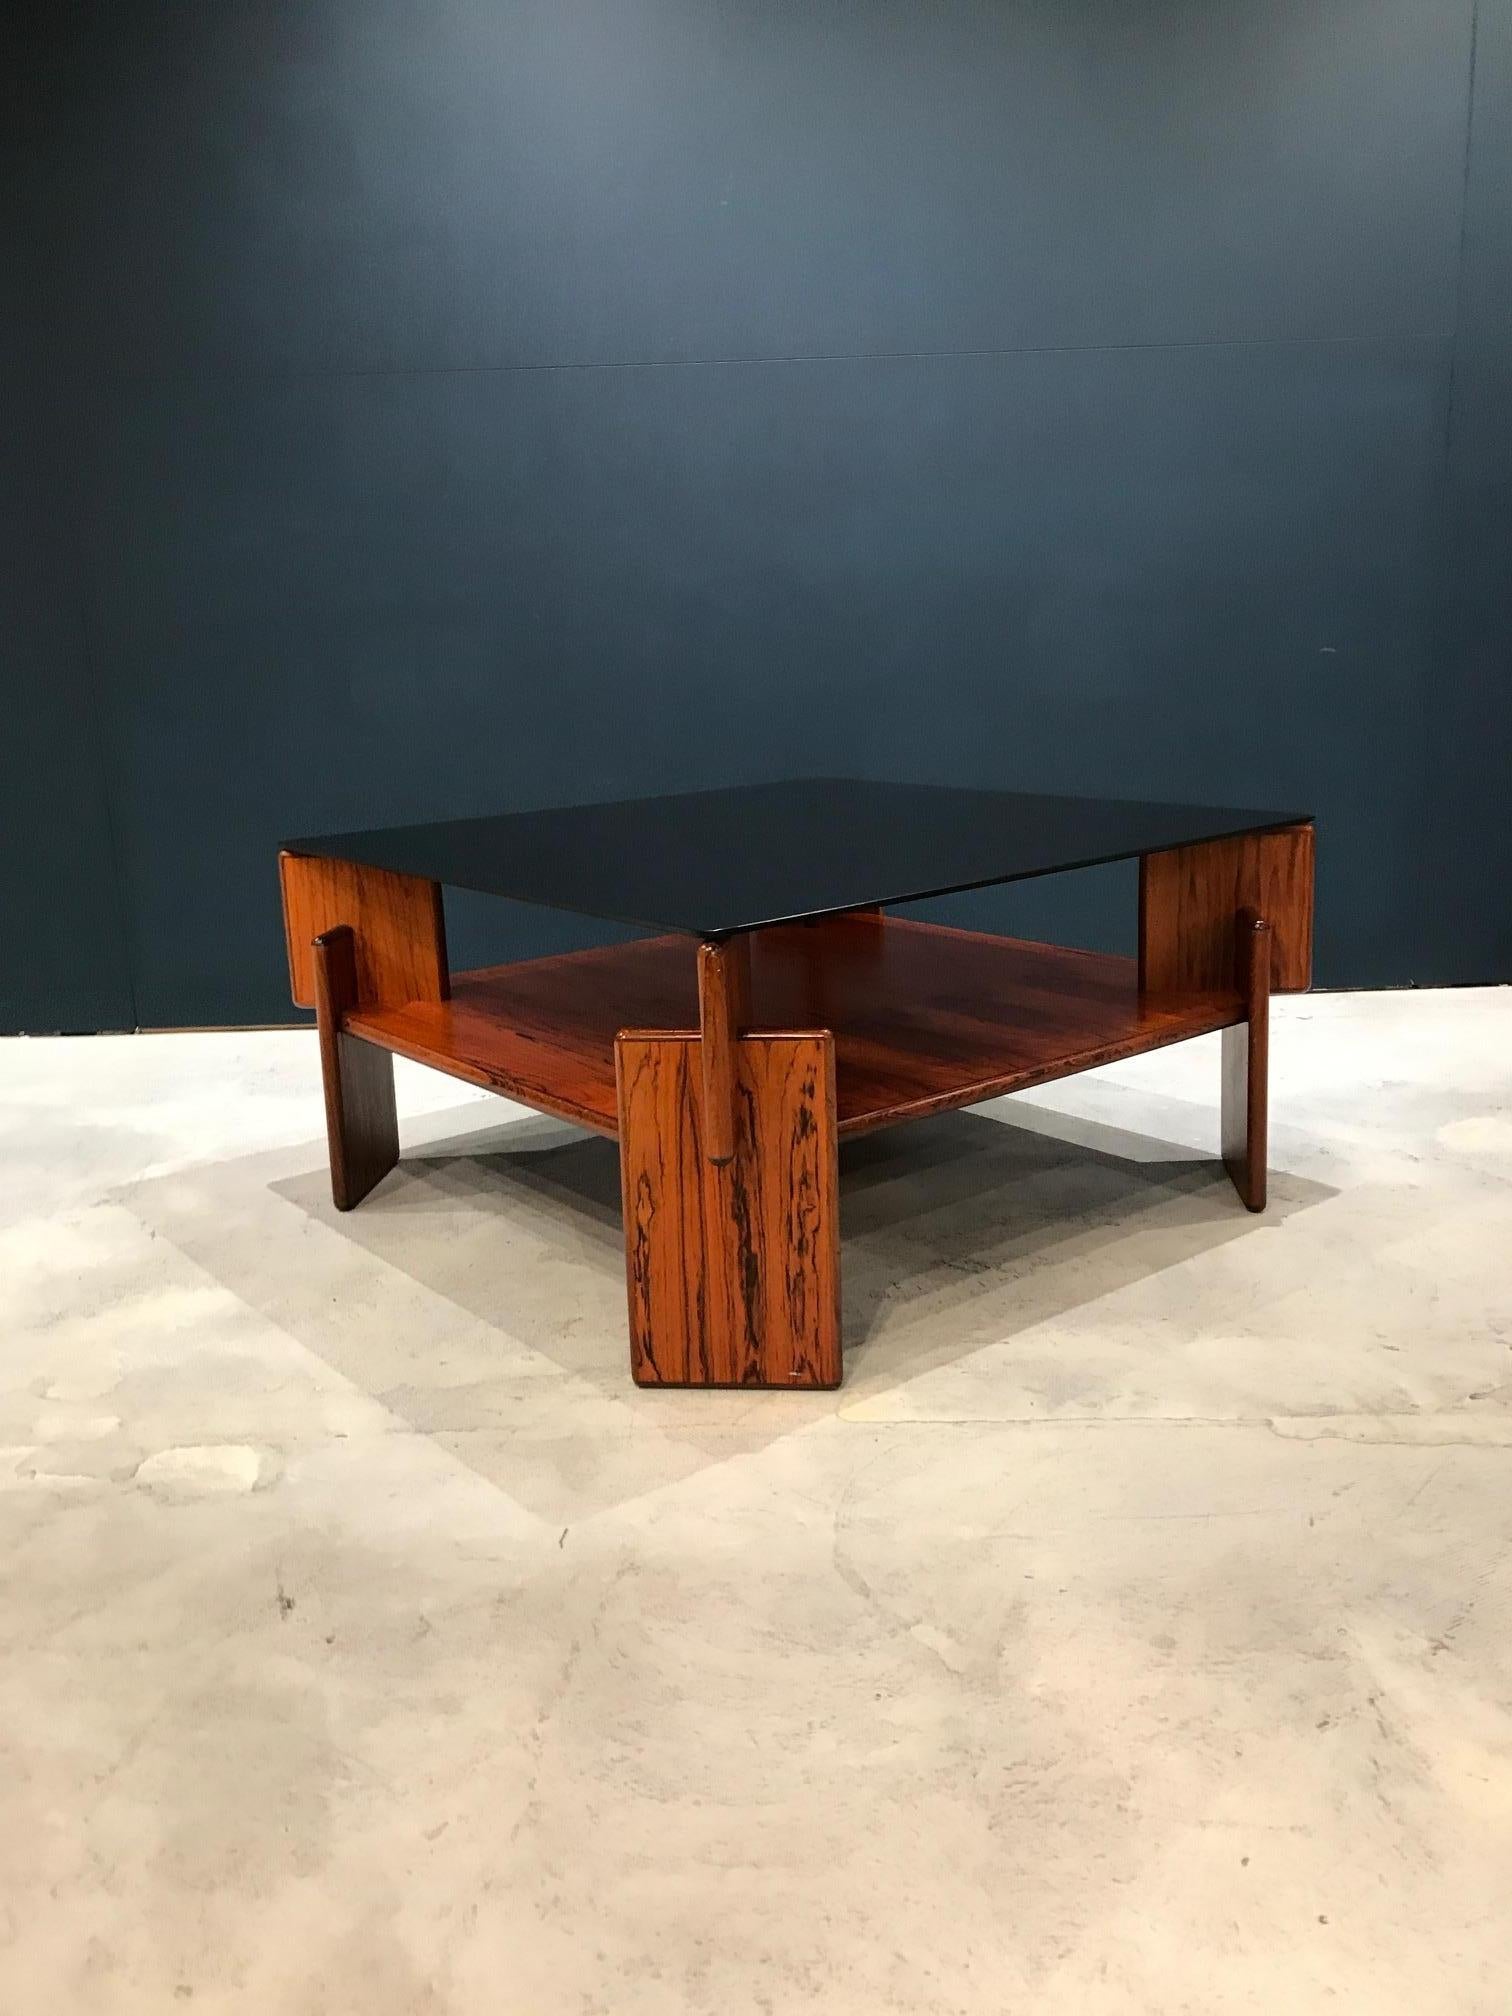 Scandinavian Mid-Century Modern Coffee Table, by Torbjorn Afdal In Good Condition For Sale In Melbourne, Victoria